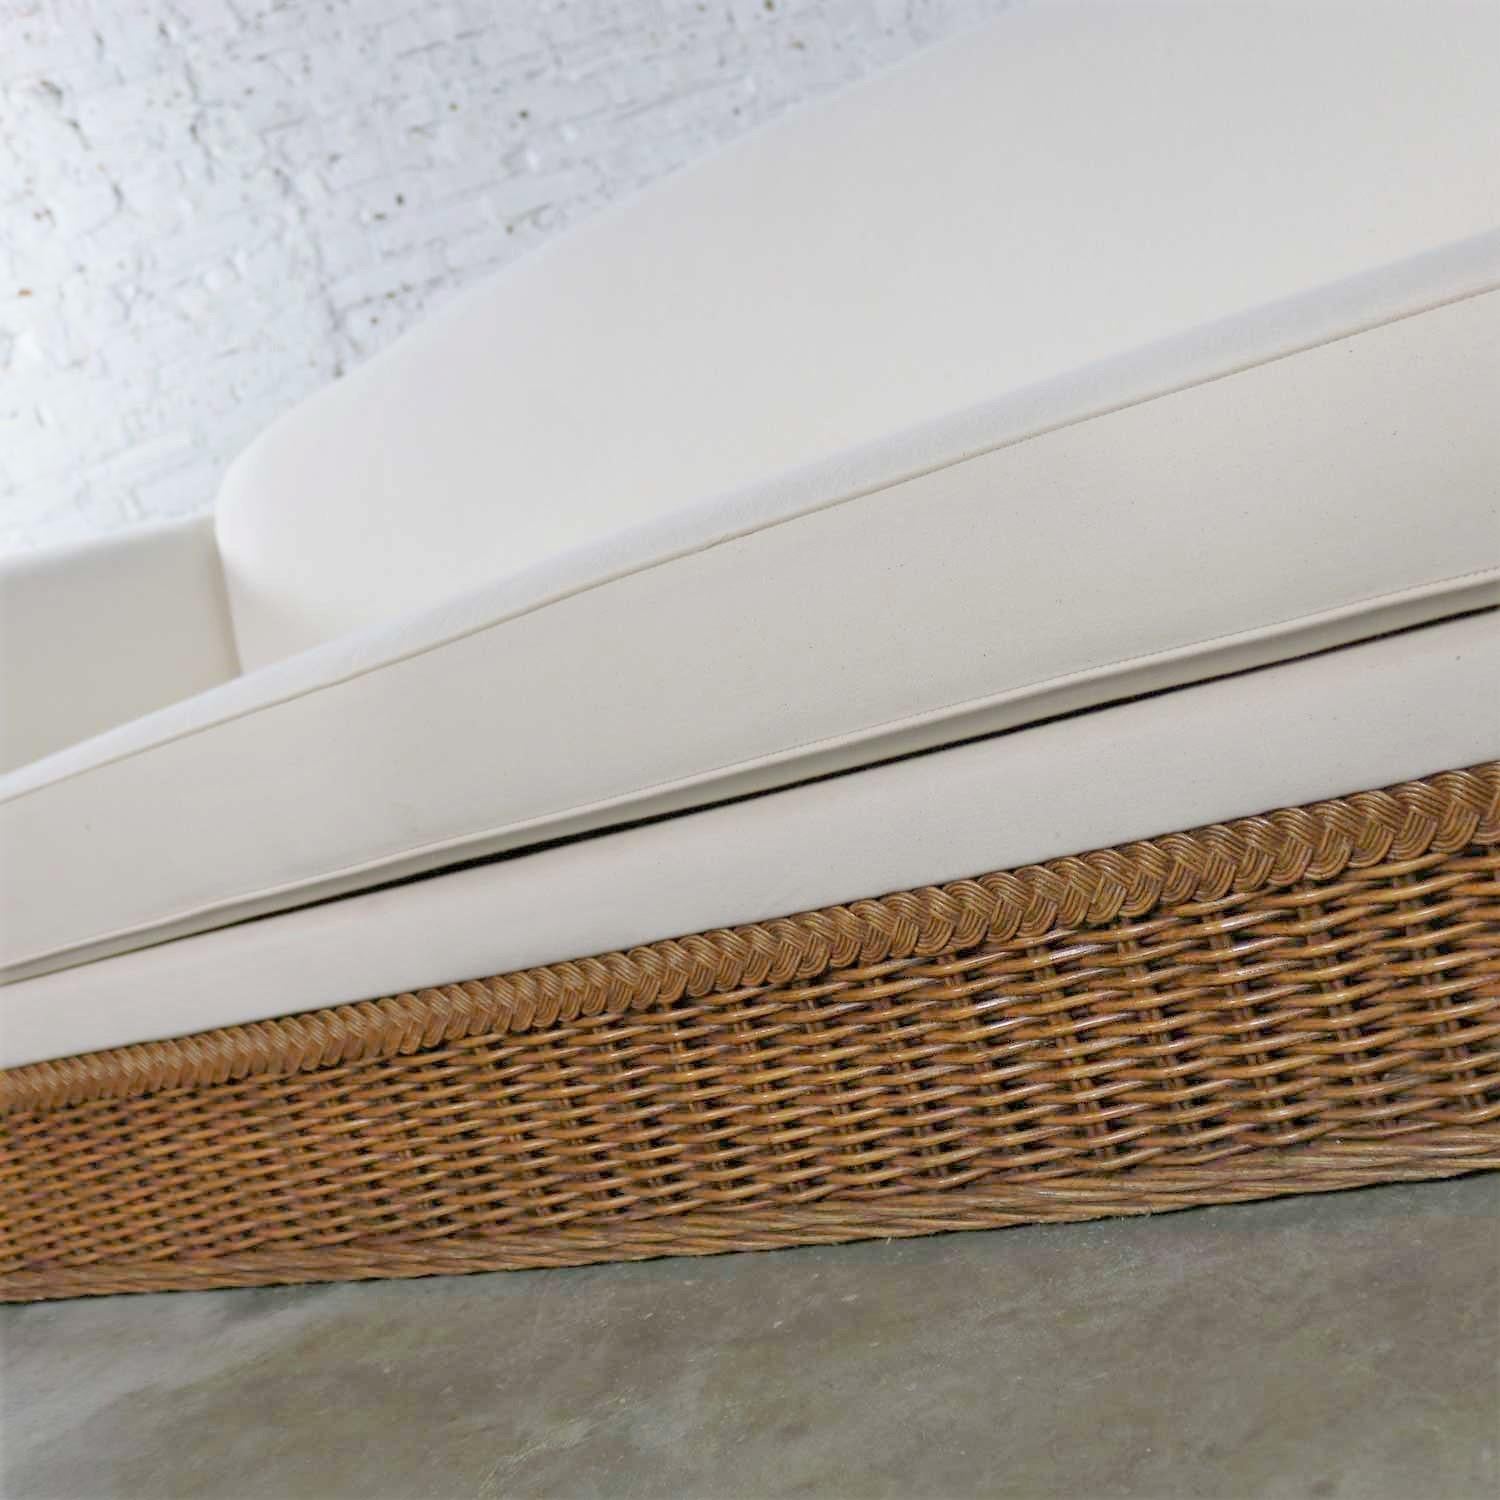 Vintage Modern Wicker Sofa Manner Michael Taylor in New White Canvas 8